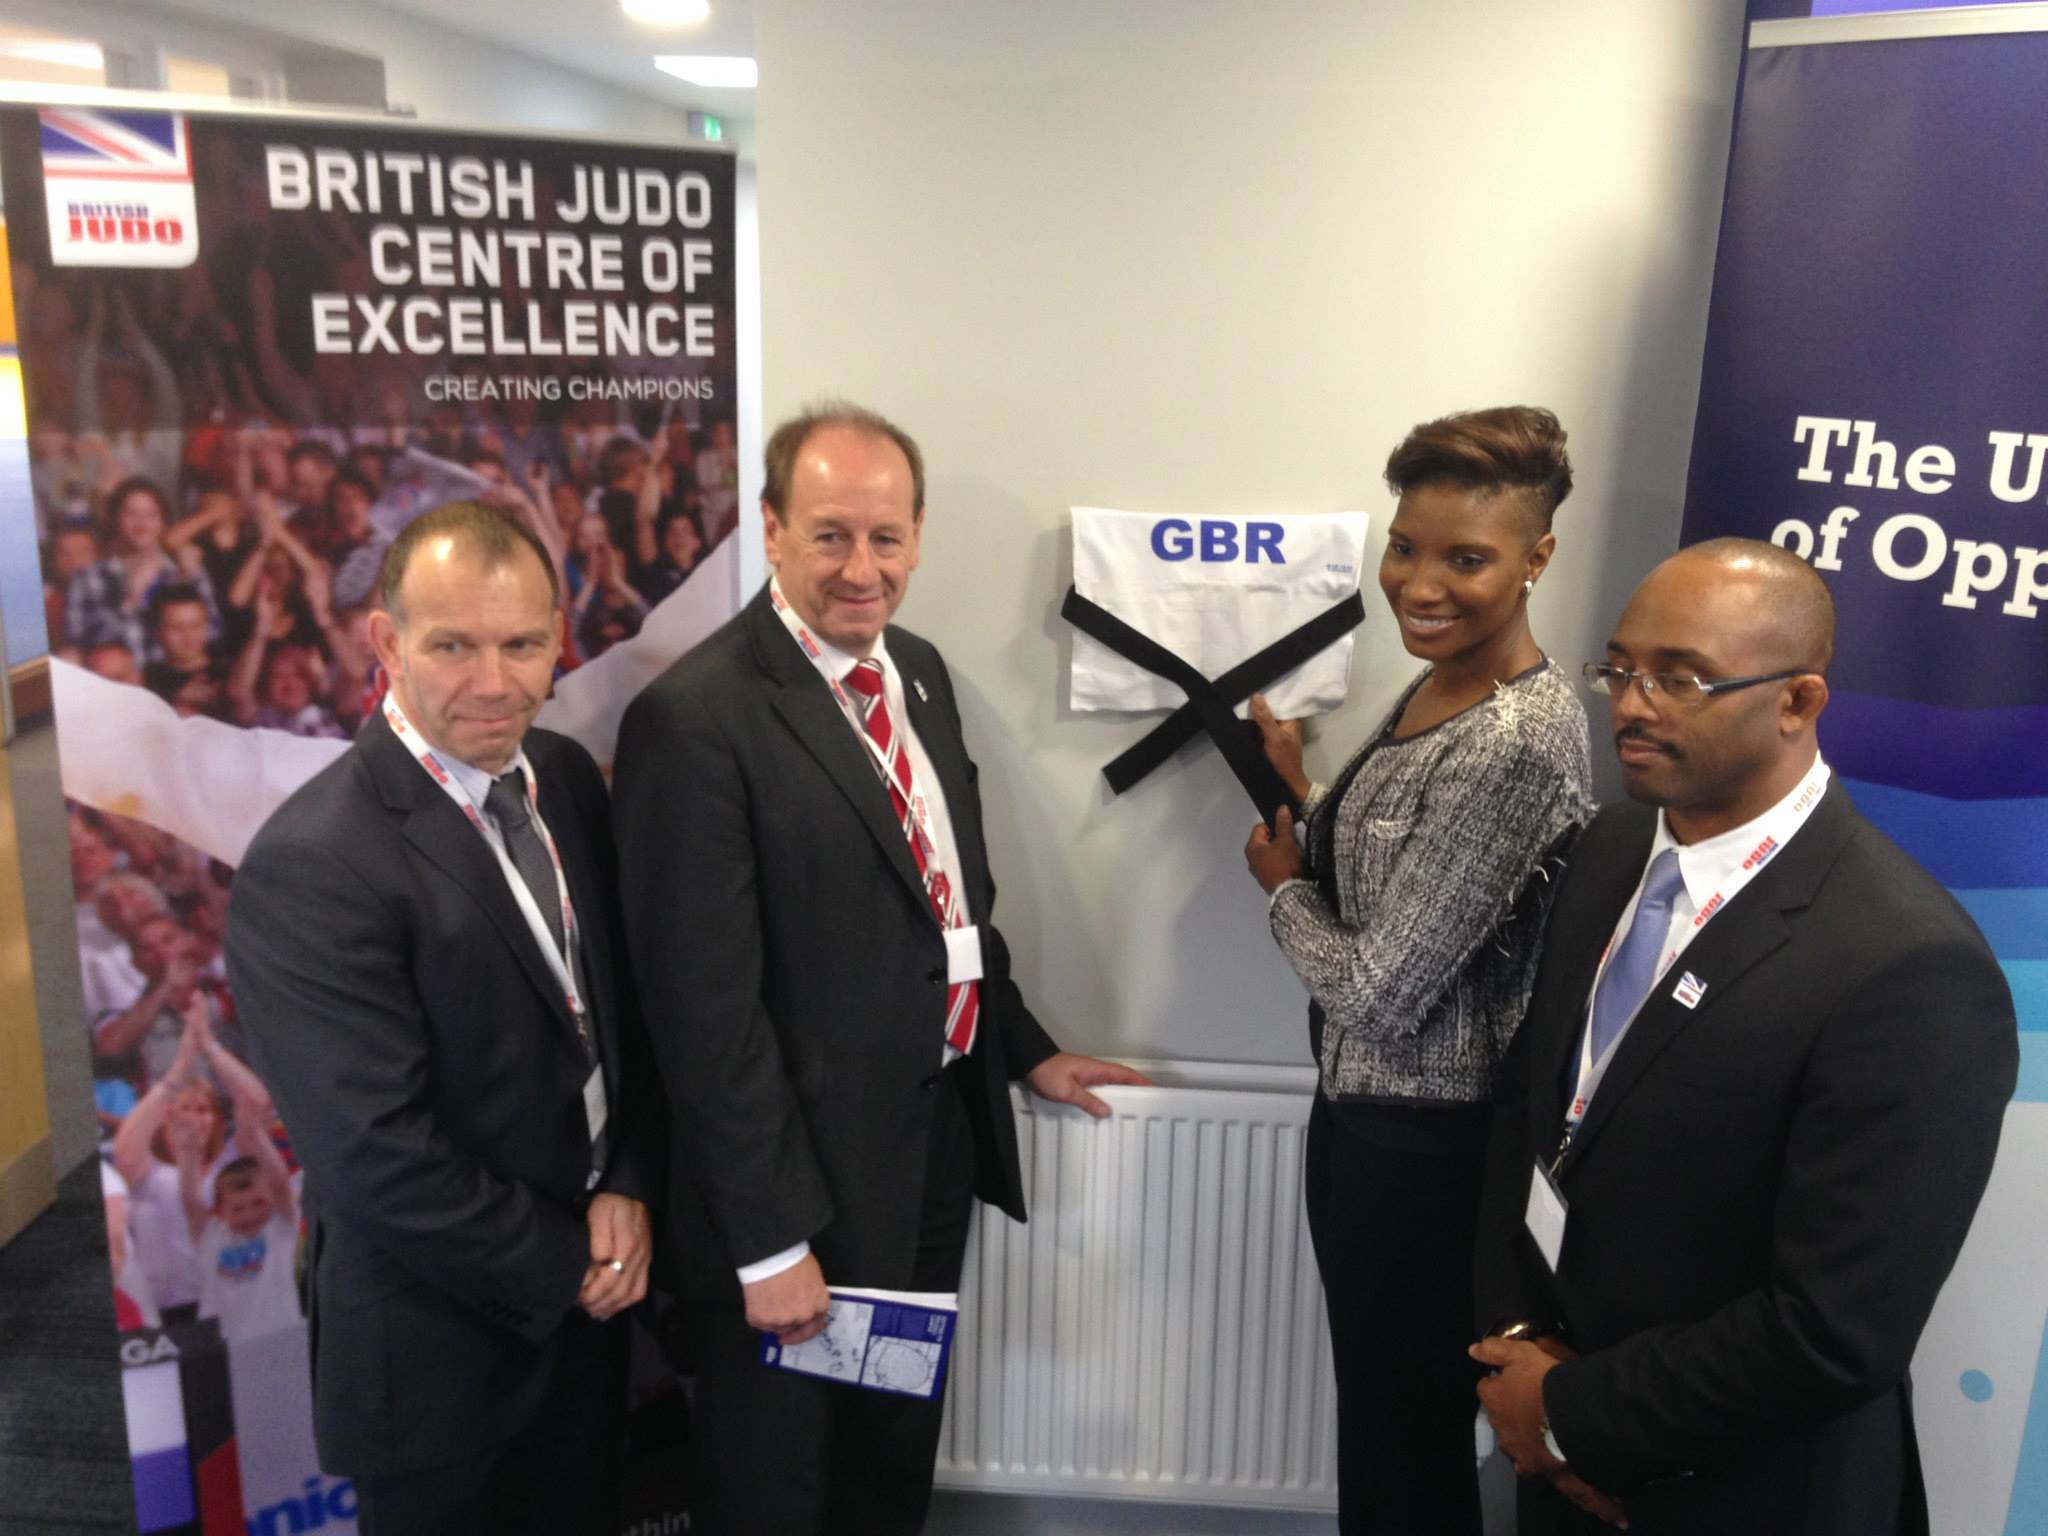 Denise Lewis unveiling the British Judo Centre of Excellence in her home town University of Wolverhampton